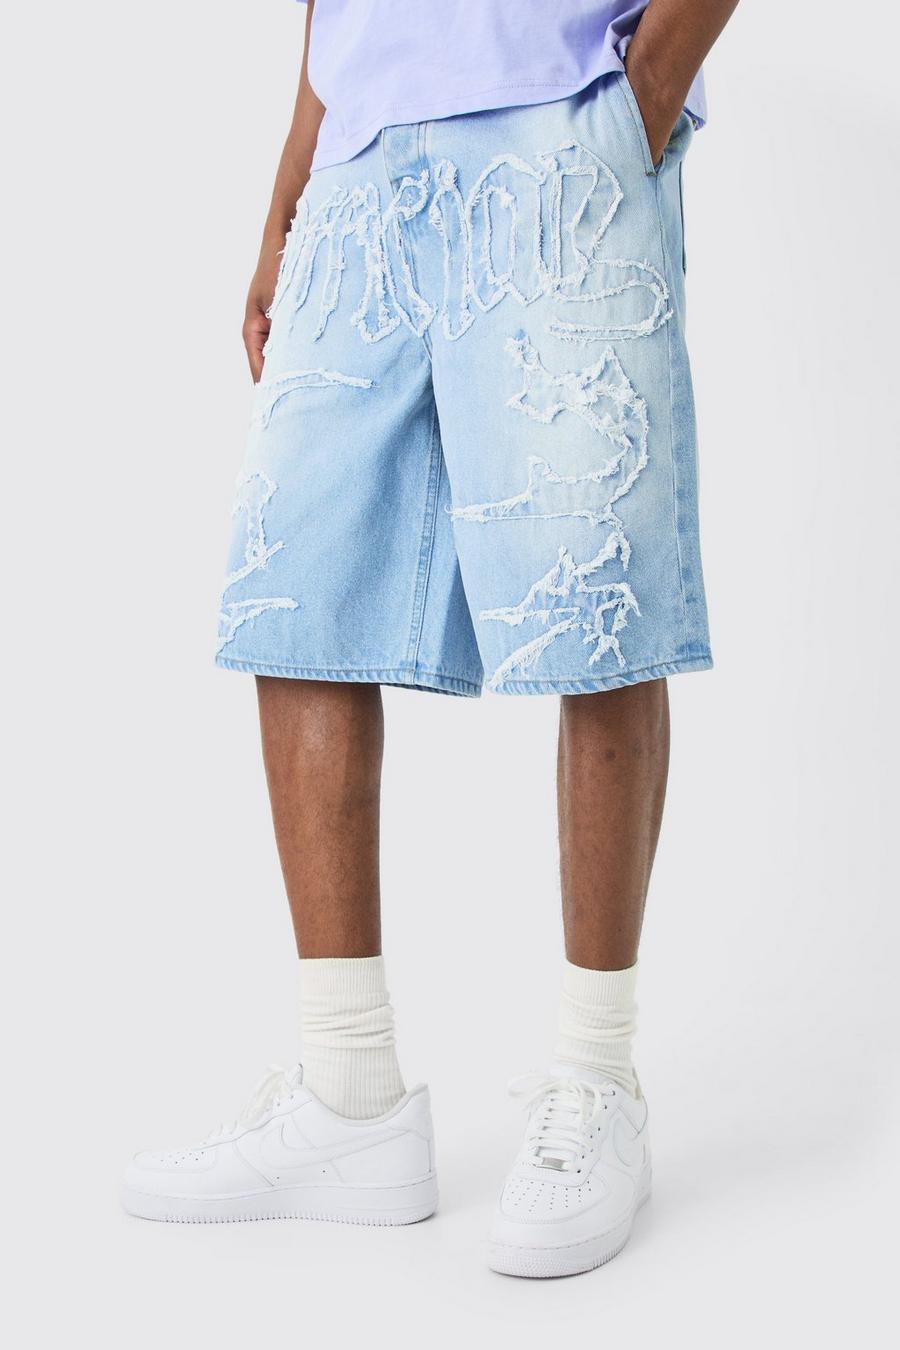 Official Self Fabric Applique Denim Jorts In Ice Blue image number 1